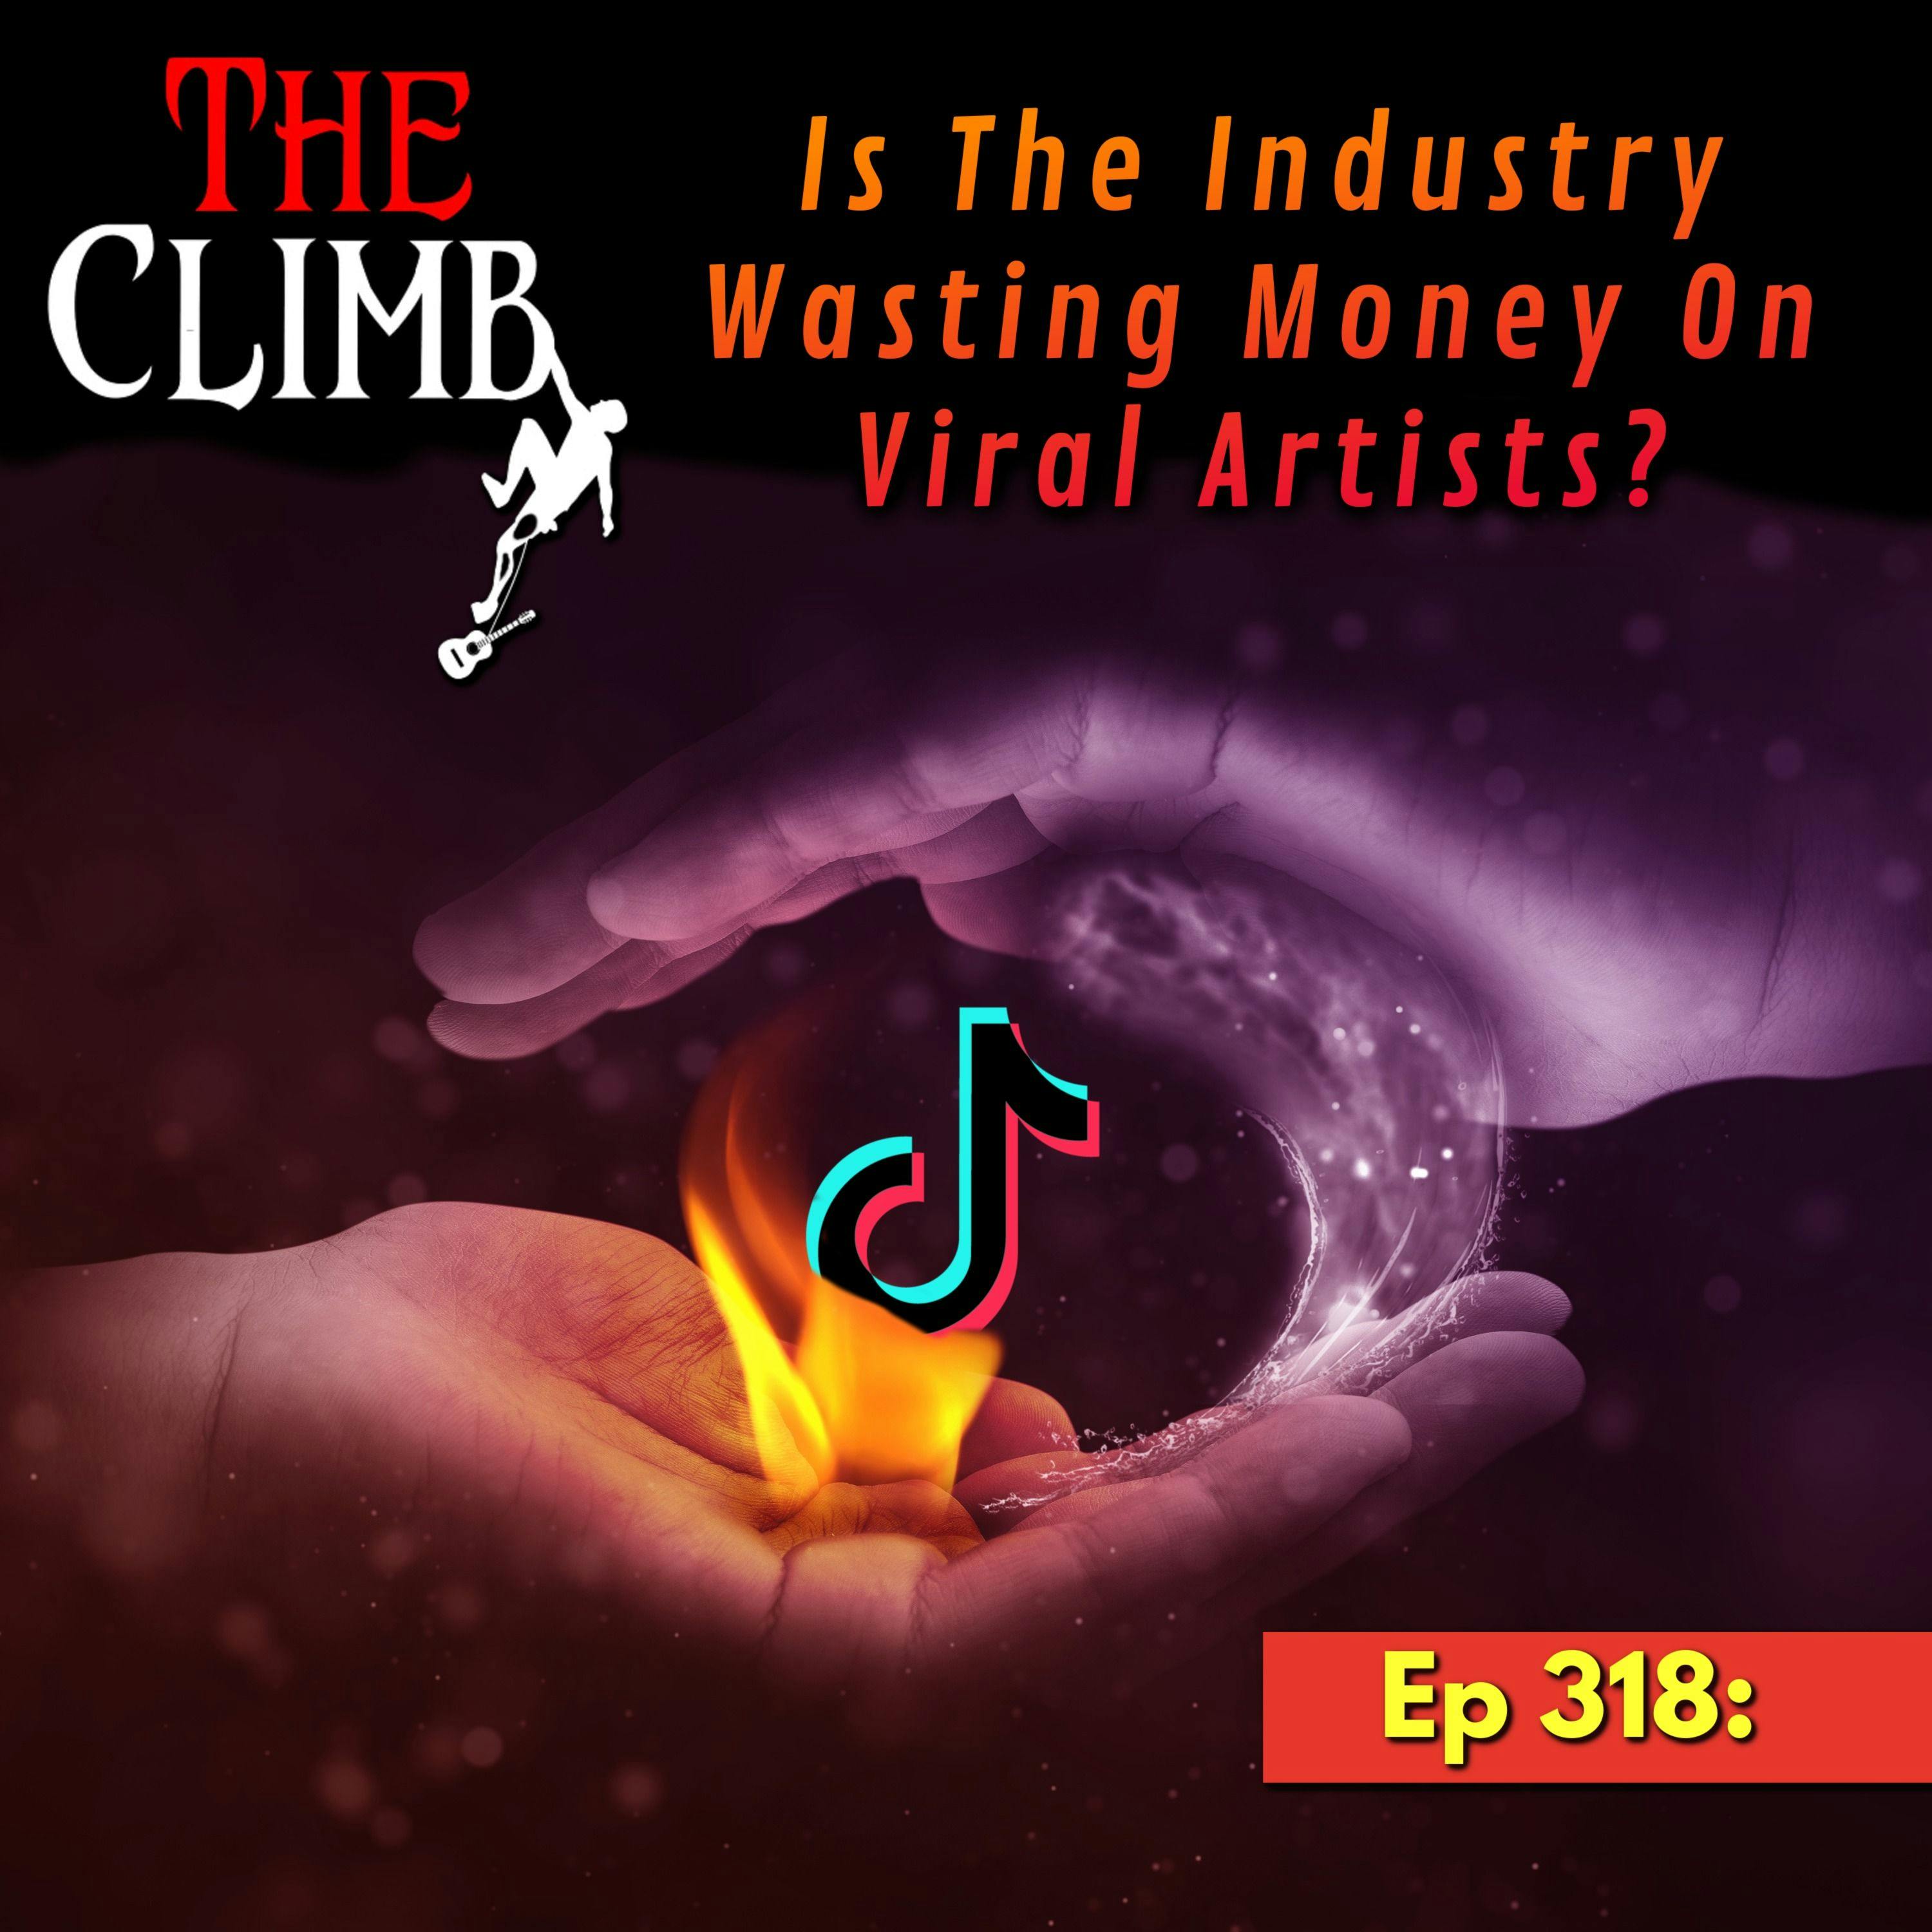 Ep 318: Is The Industry Wasting Money On Viral Artists?